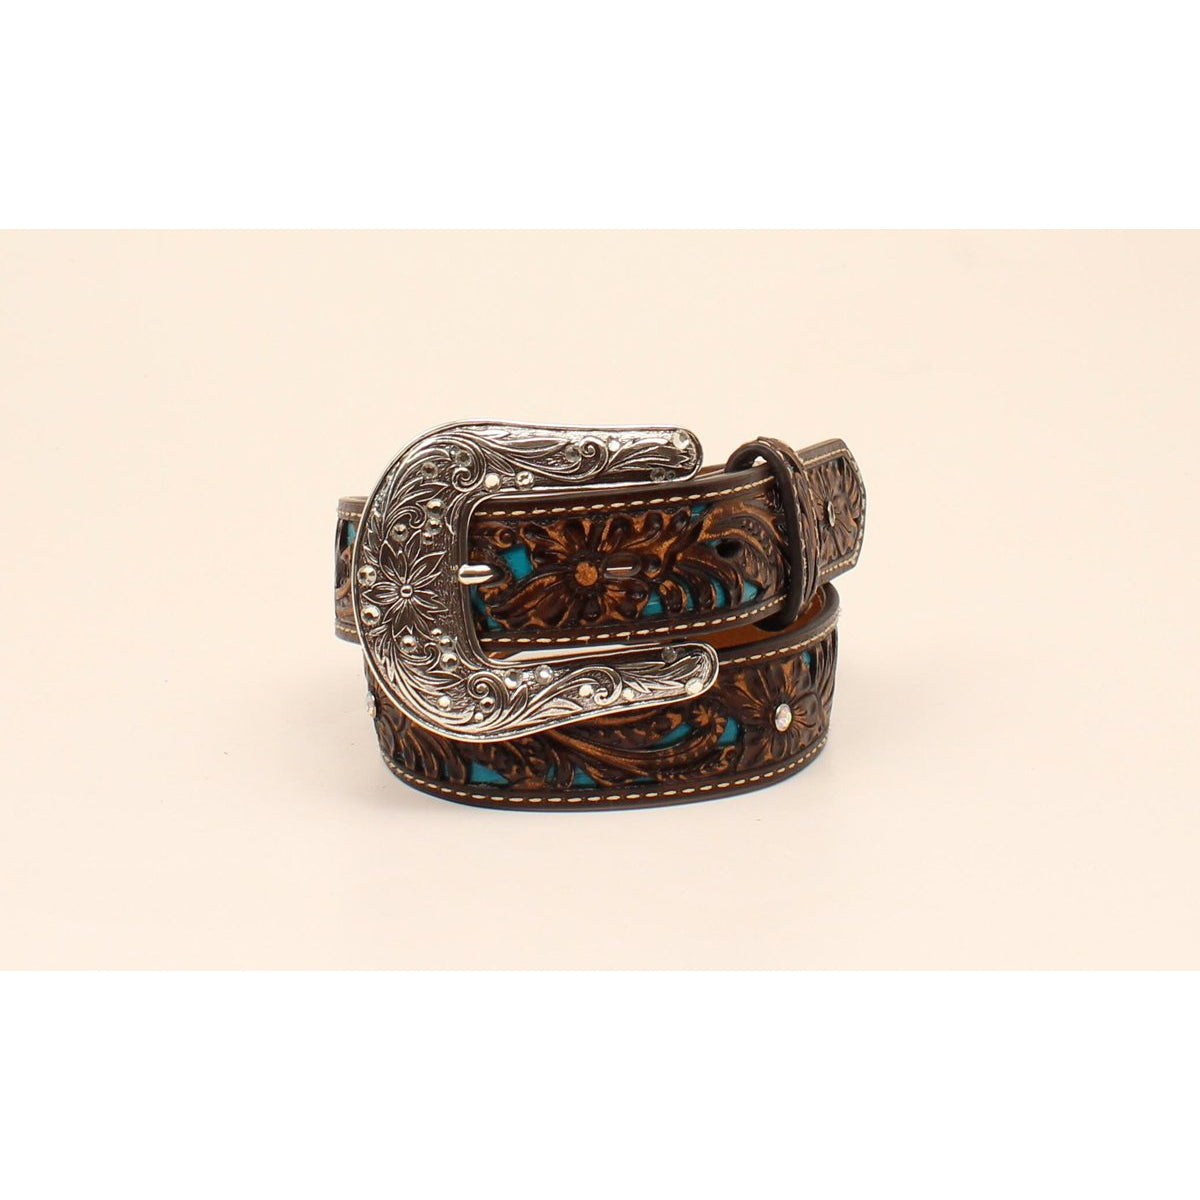 Ariat Girl's Floral Crystal Studded Embossed Belt - Brown/Turquoise